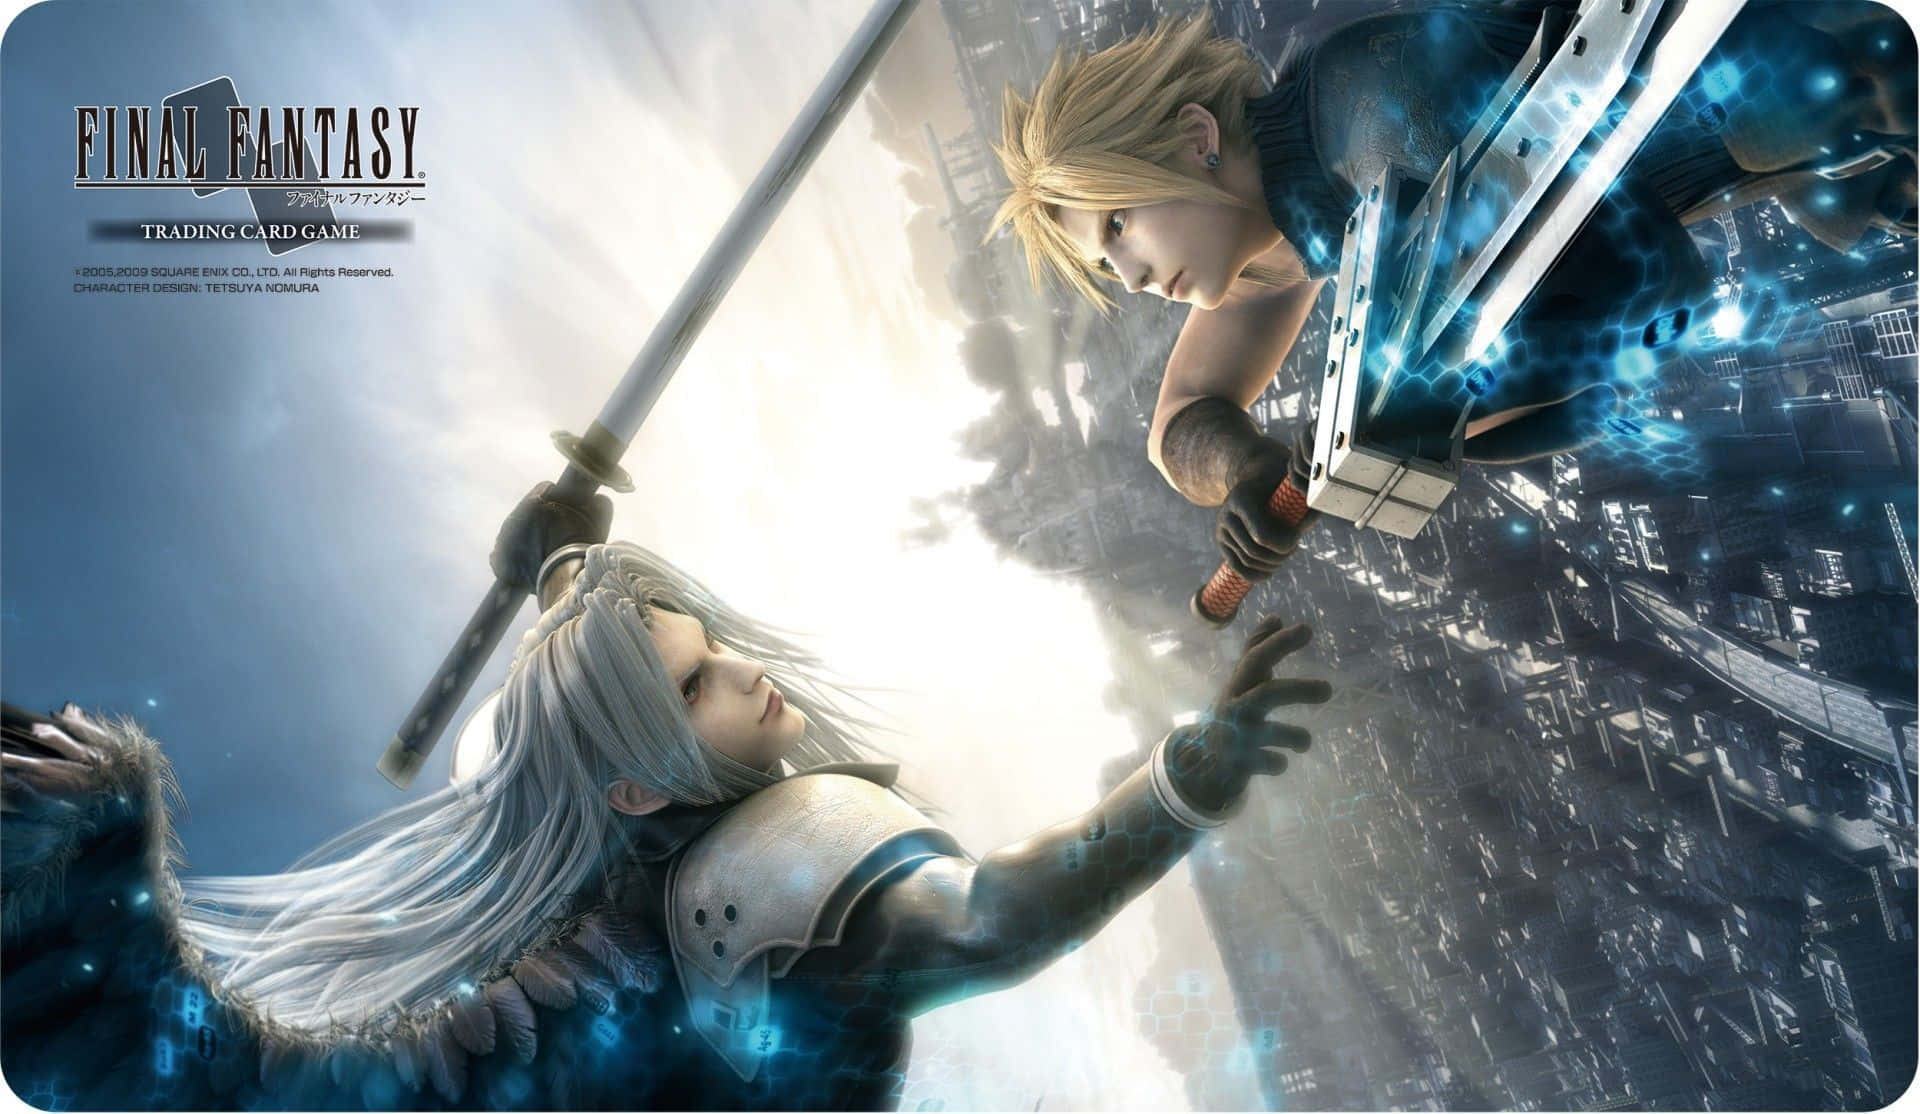 Experience the Epic Adventure of Final Fantasy